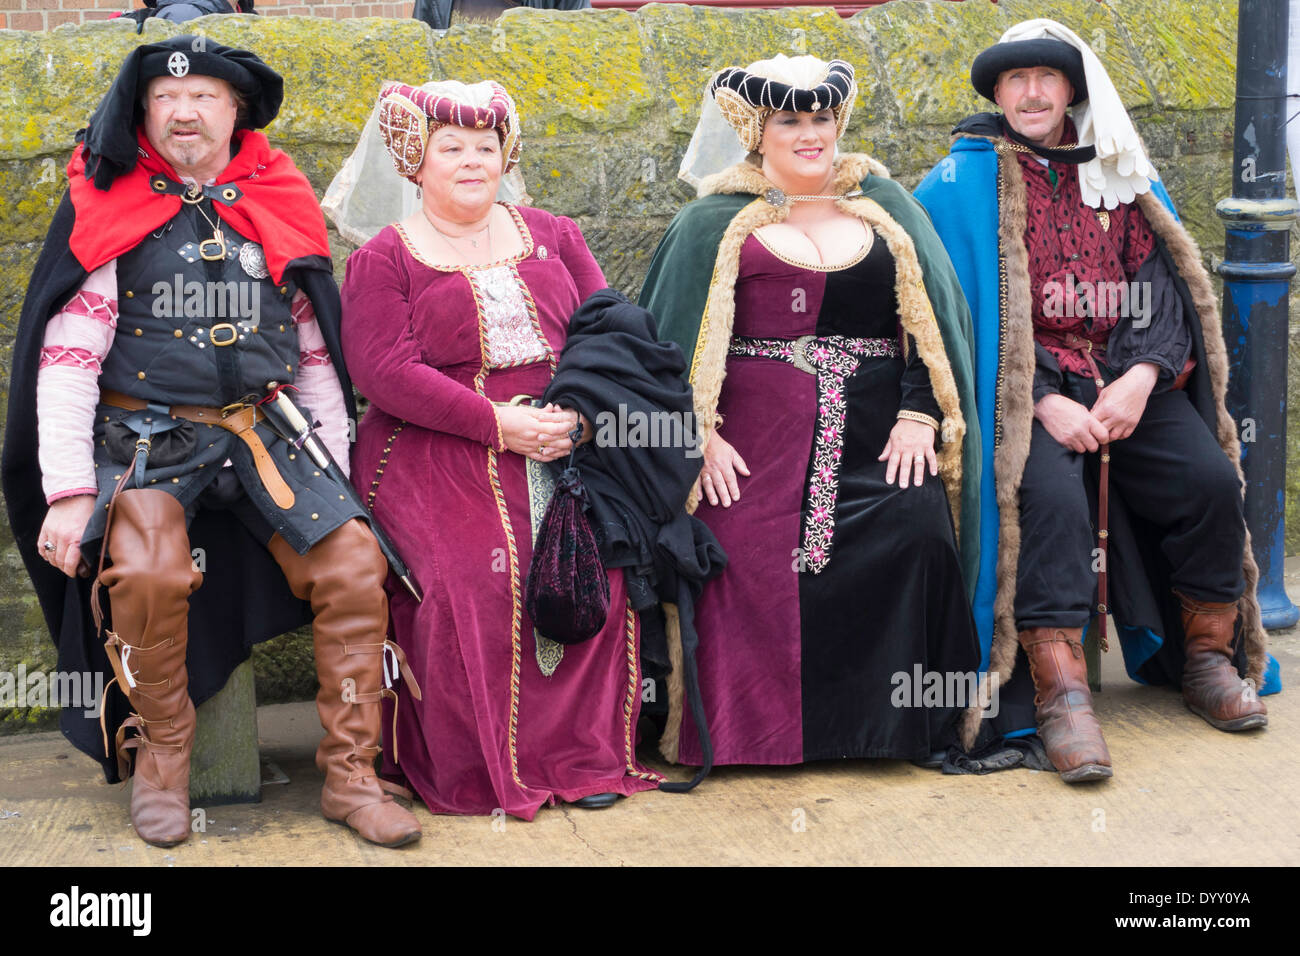 Two men and their women partners in Elizabethan Gothic dress  at the Whitby Goth Week End spring 2014 Stock Photo